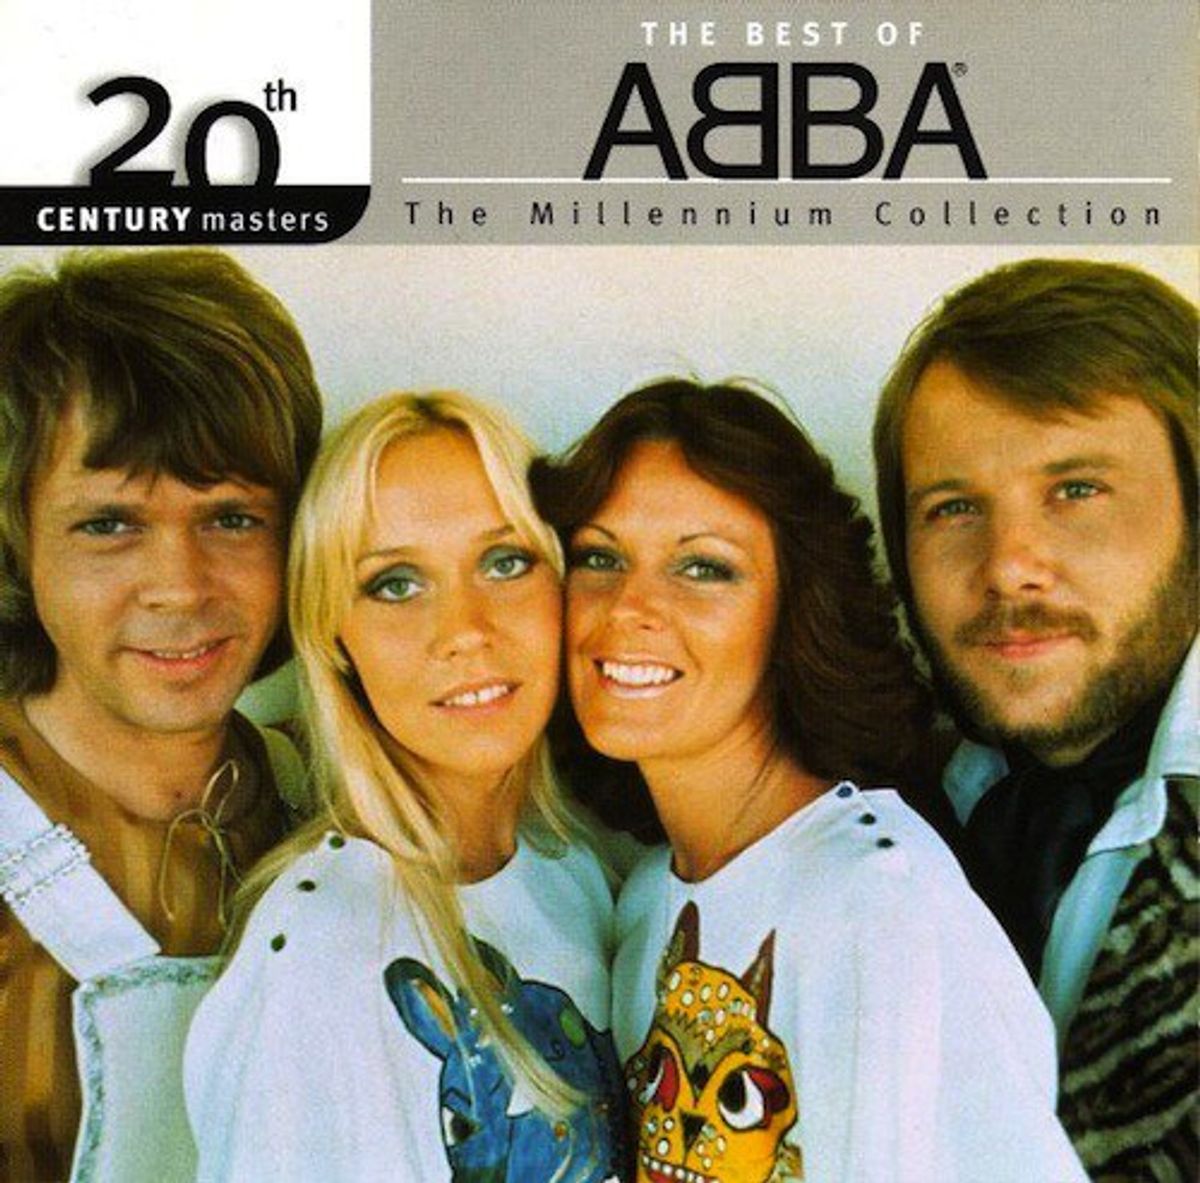 What is Your Role in Your #Squad (As Told by ABBA Songs)